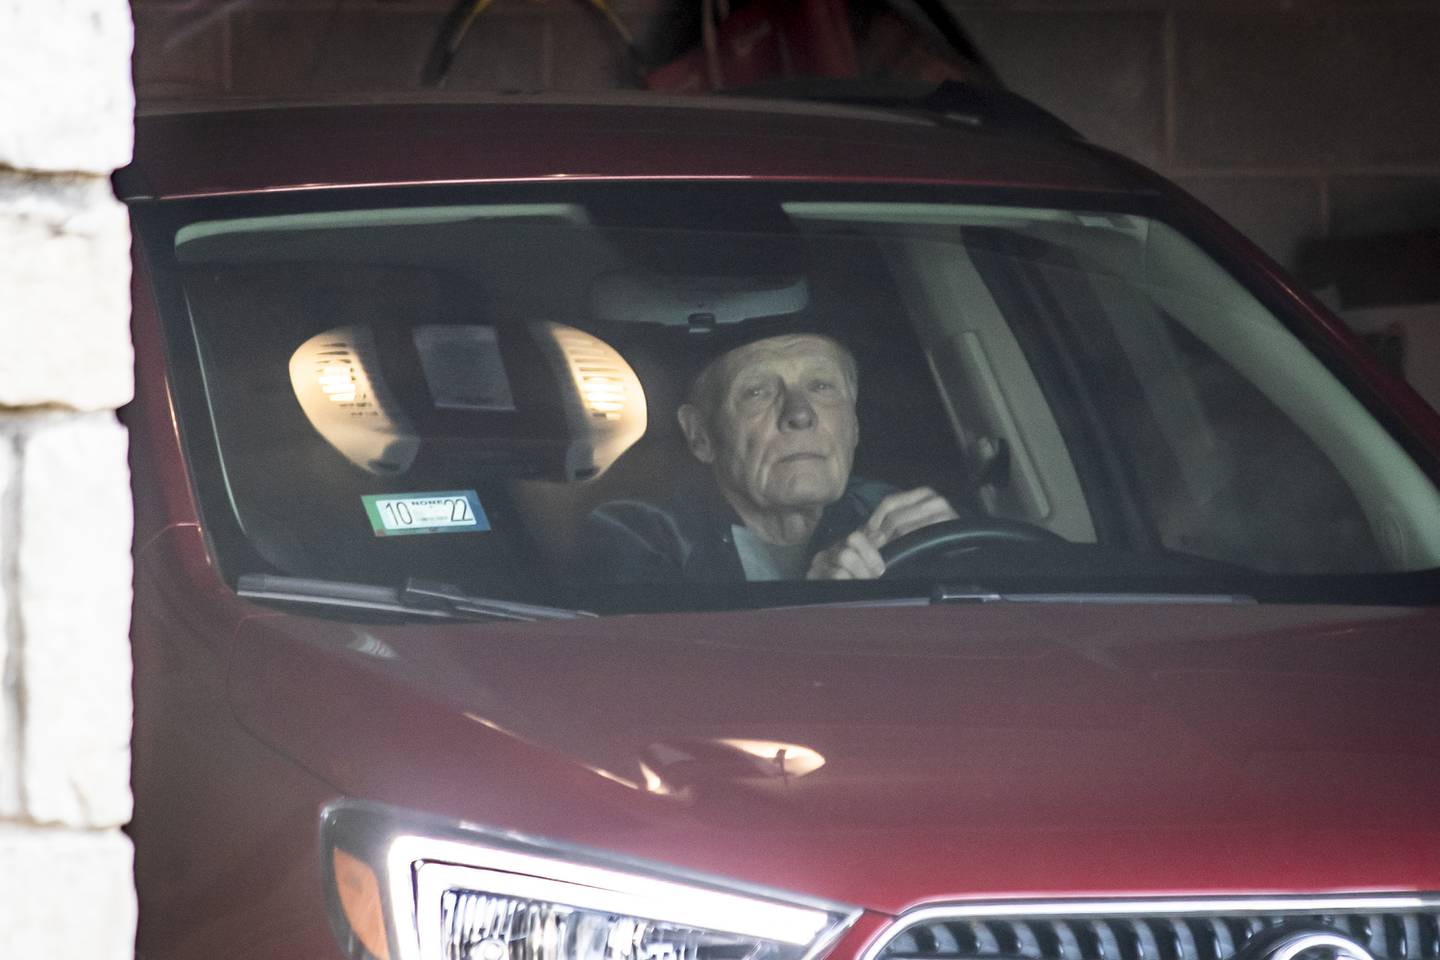 Former Illinois Speaker of the House Michael Madigan parks a car in the garage of his home, Wednesday afternoon, March 2, 2022, in Chicago. Madigan, the former speaker of the Illinois House and for decades one of the nation’s most powerful legislators, was charged with racketeering and bribery on Wednesday March 2, 2022, becoming the most prominent politician swept up in the latest federal investigation of entrenched government corruption in the state. (Ashlee Rezin/Chicago Sun-Times via AP)